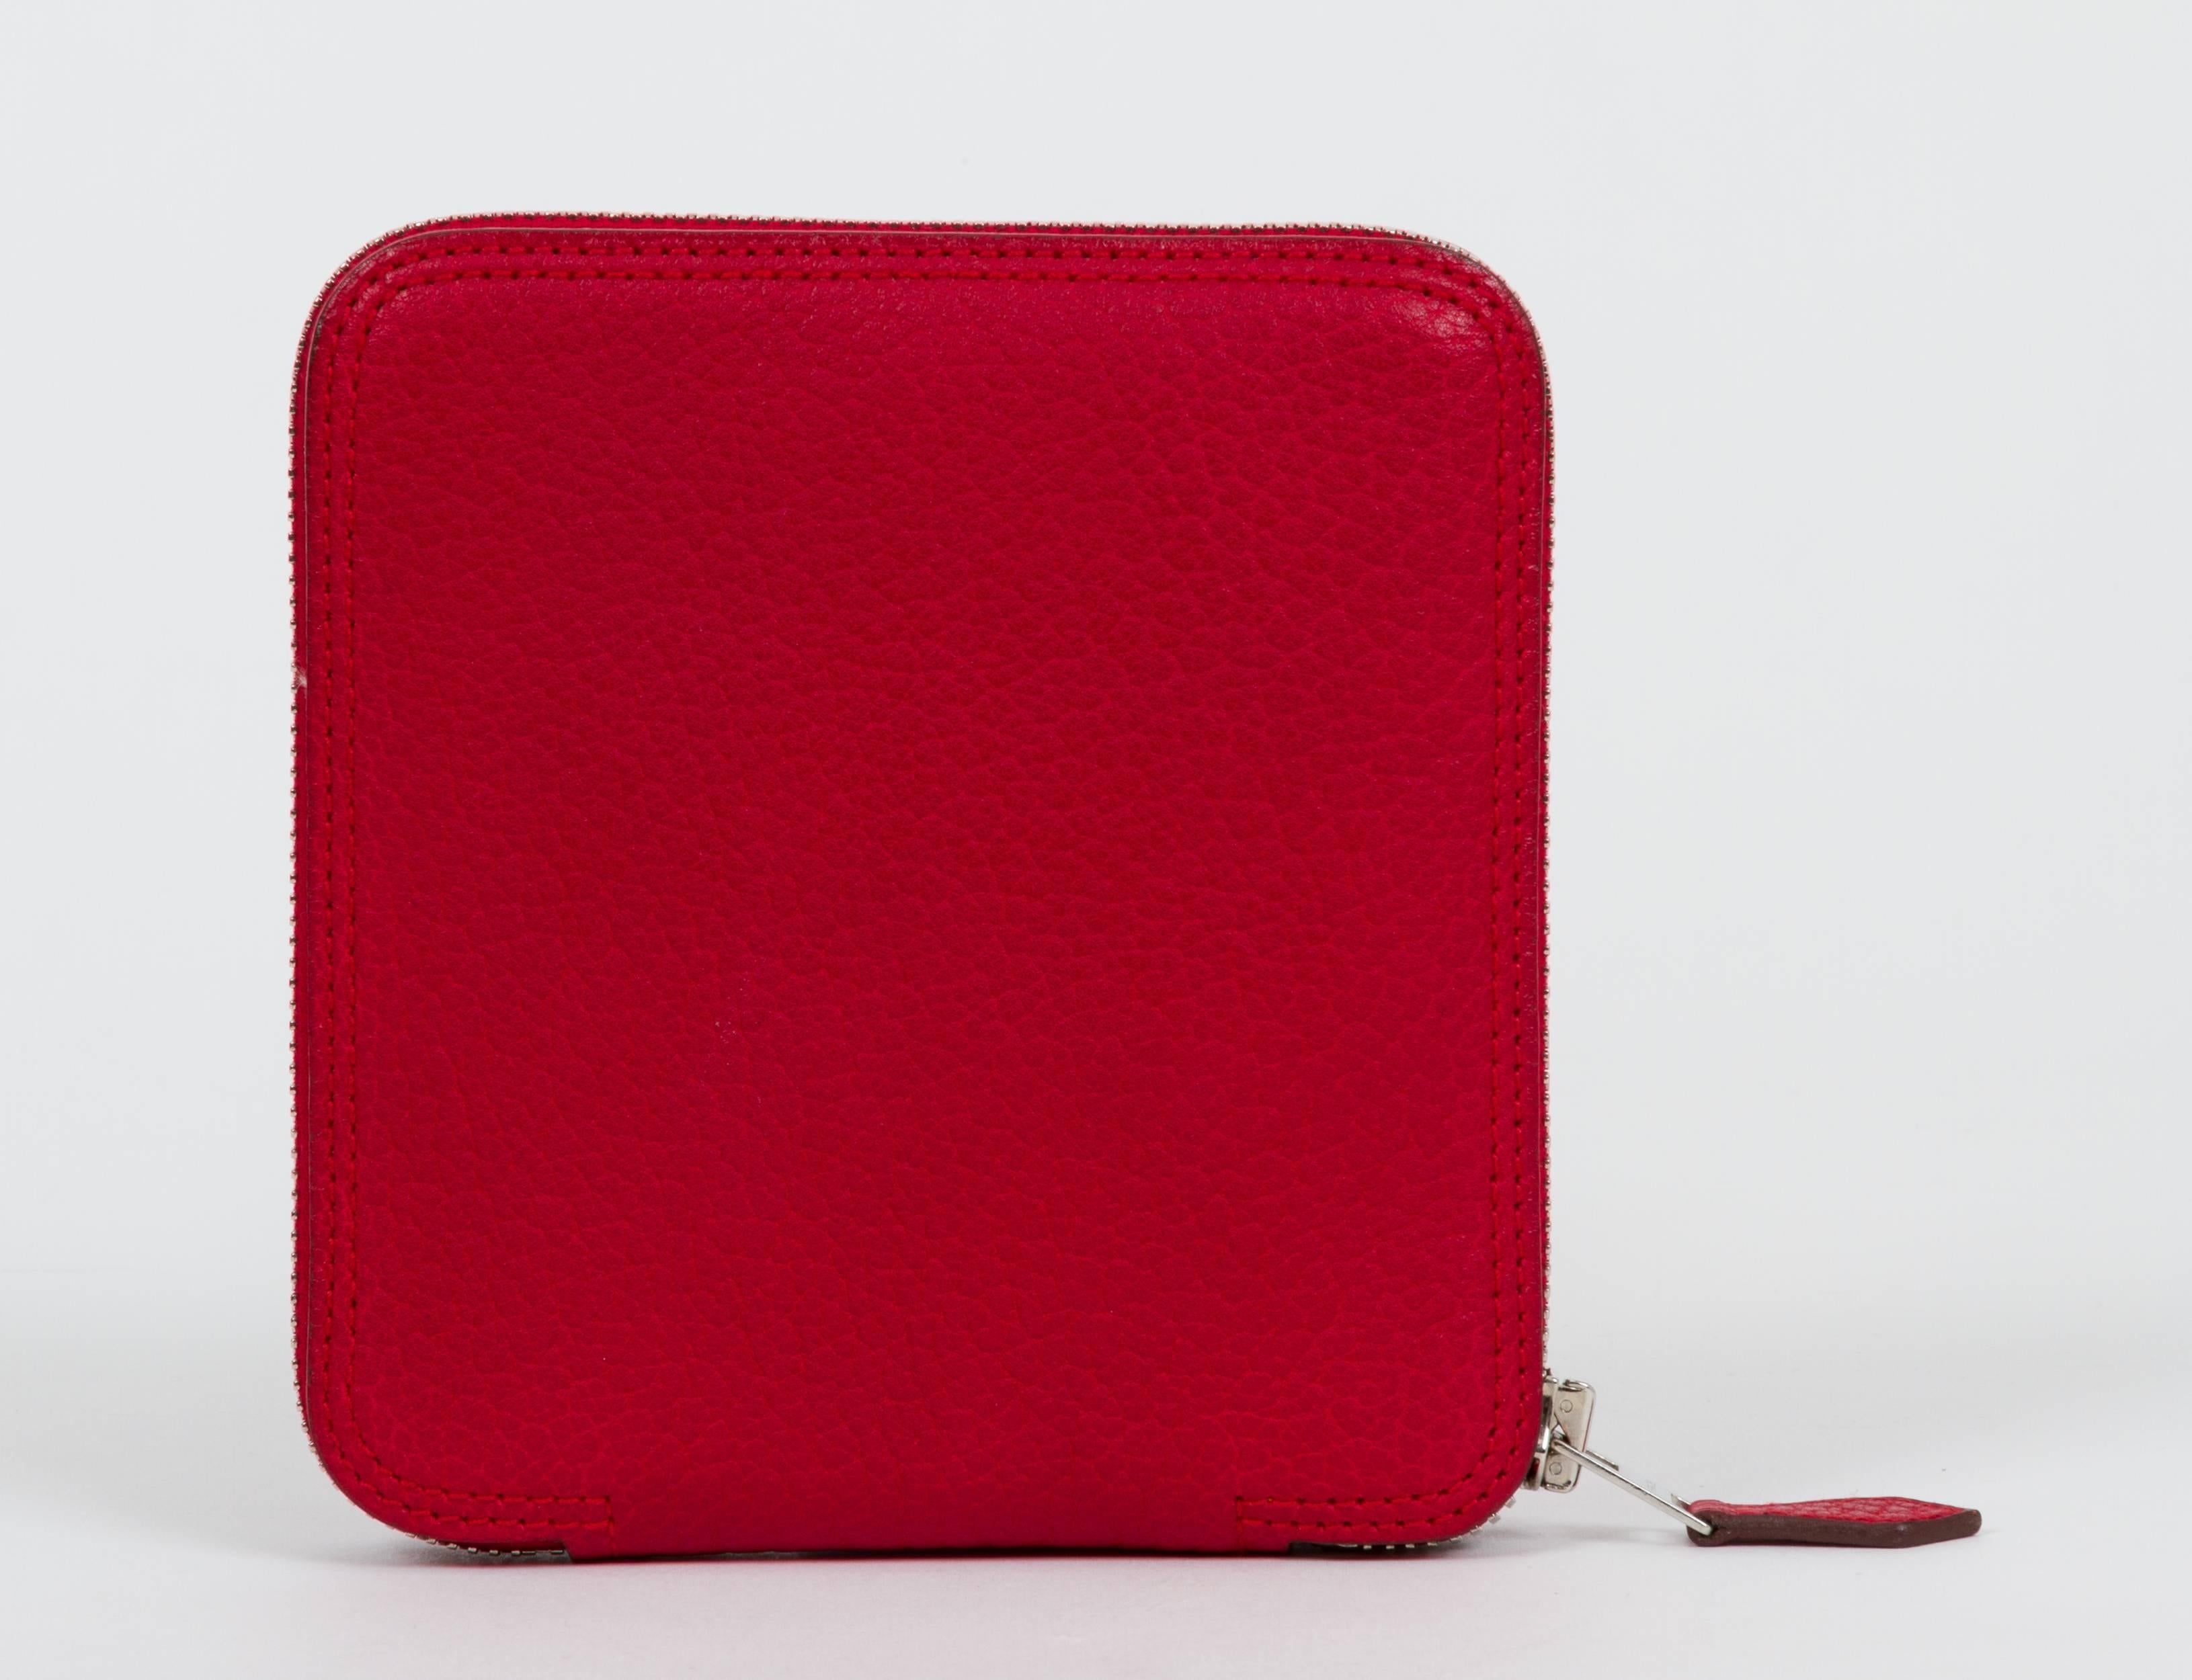 Hermès Red Silky Pop Bag In Excellent Condition For Sale In West Hollywood, CA